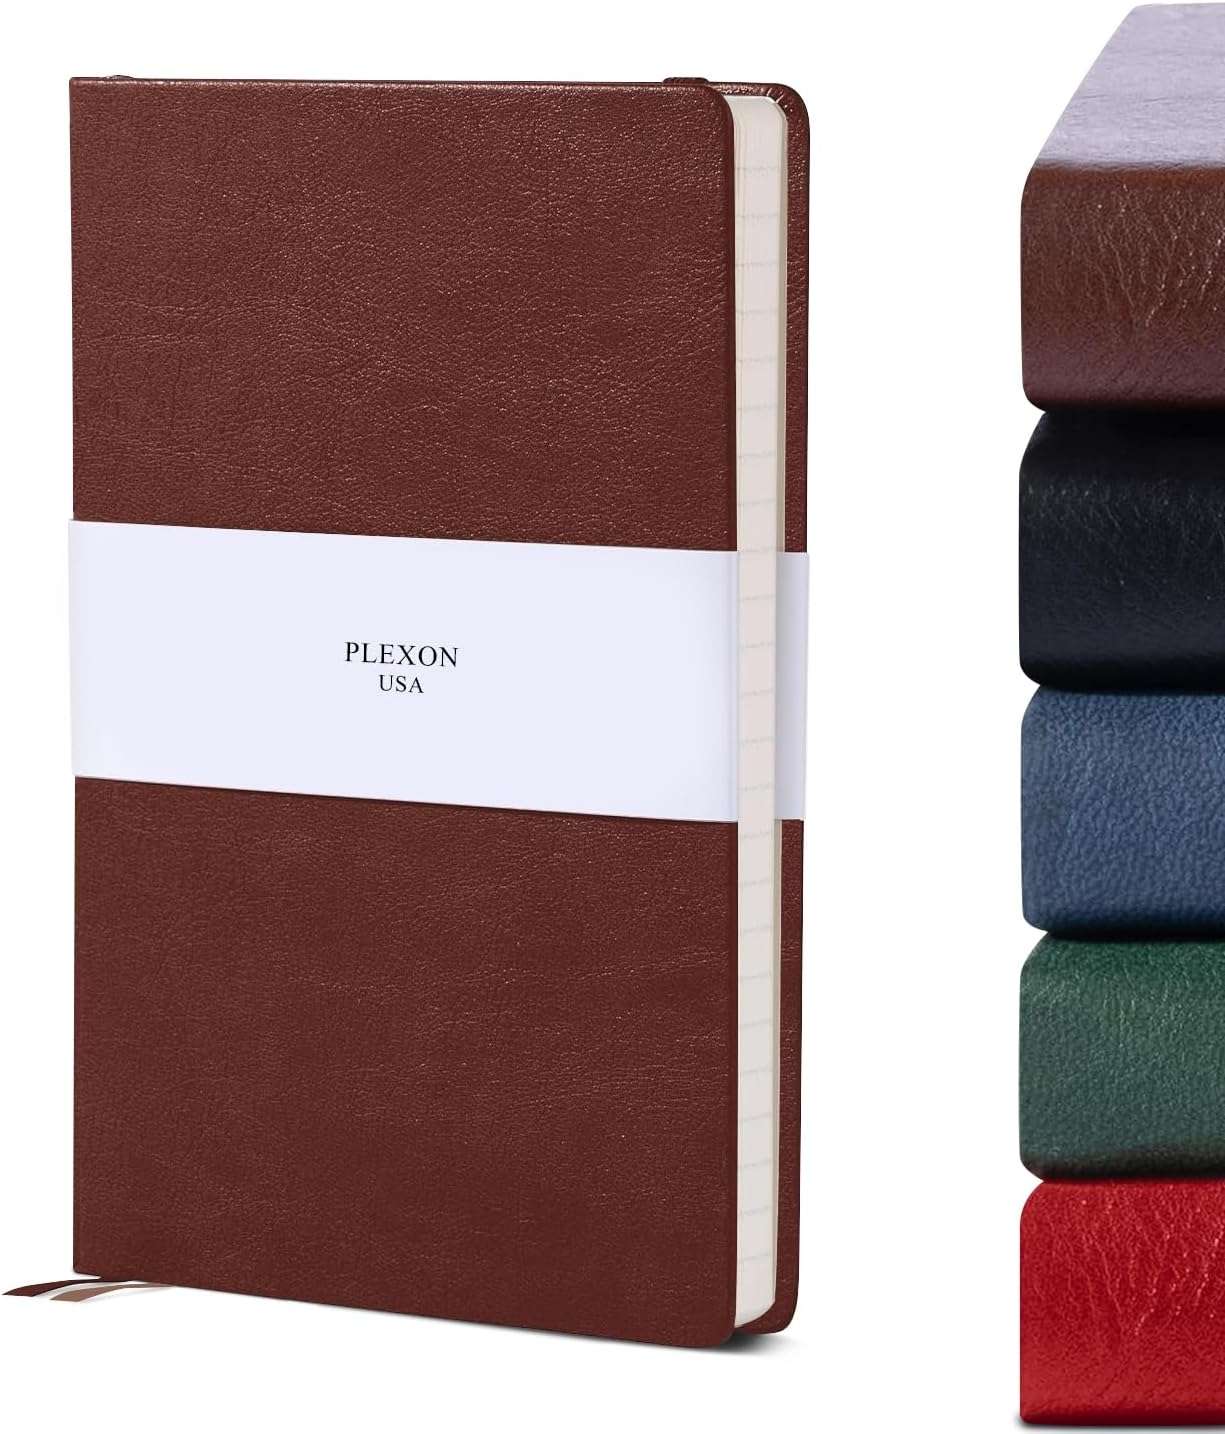 Chestnut Brown A5 Hardcover Vegan Leather Dotted Notebook with 120 gsm Cream Paper and Gift Box, 80 Sheets - 1